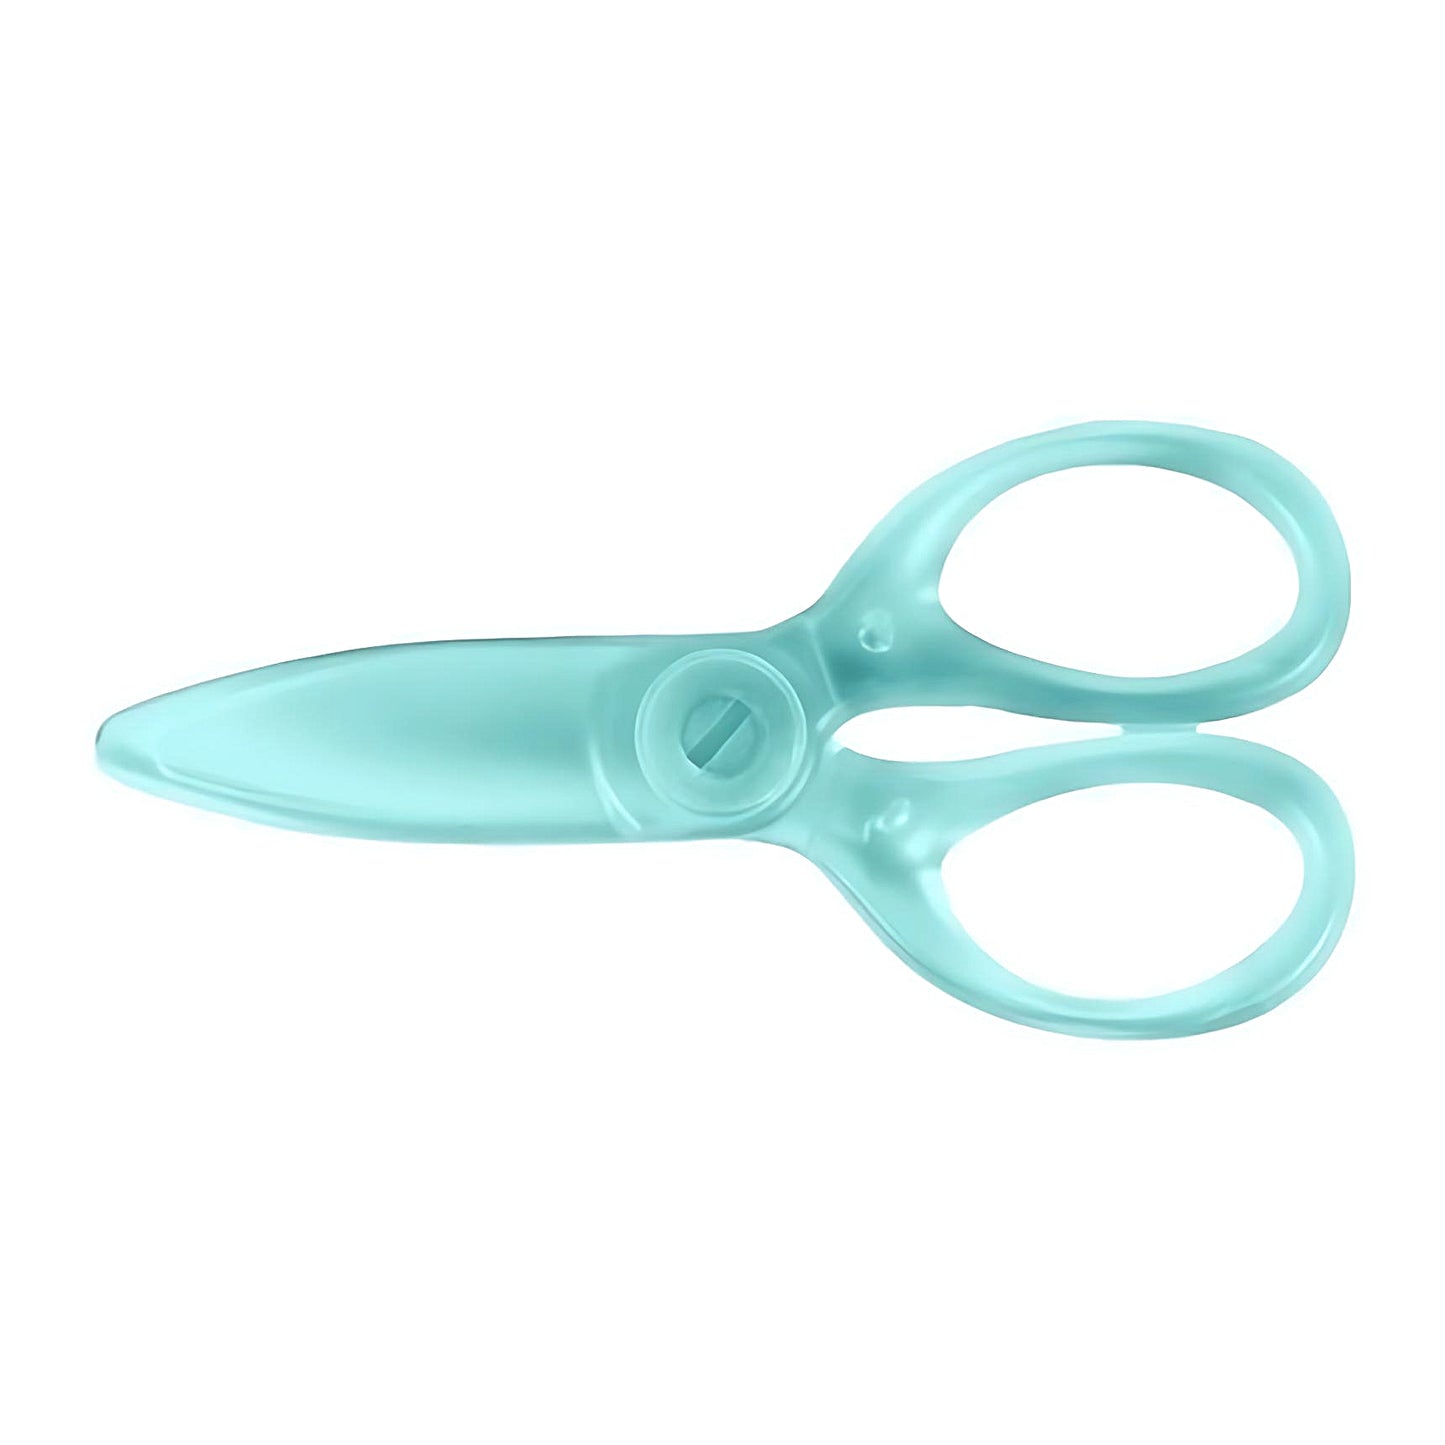 Kokuyo plastic scissors in green color on a white background